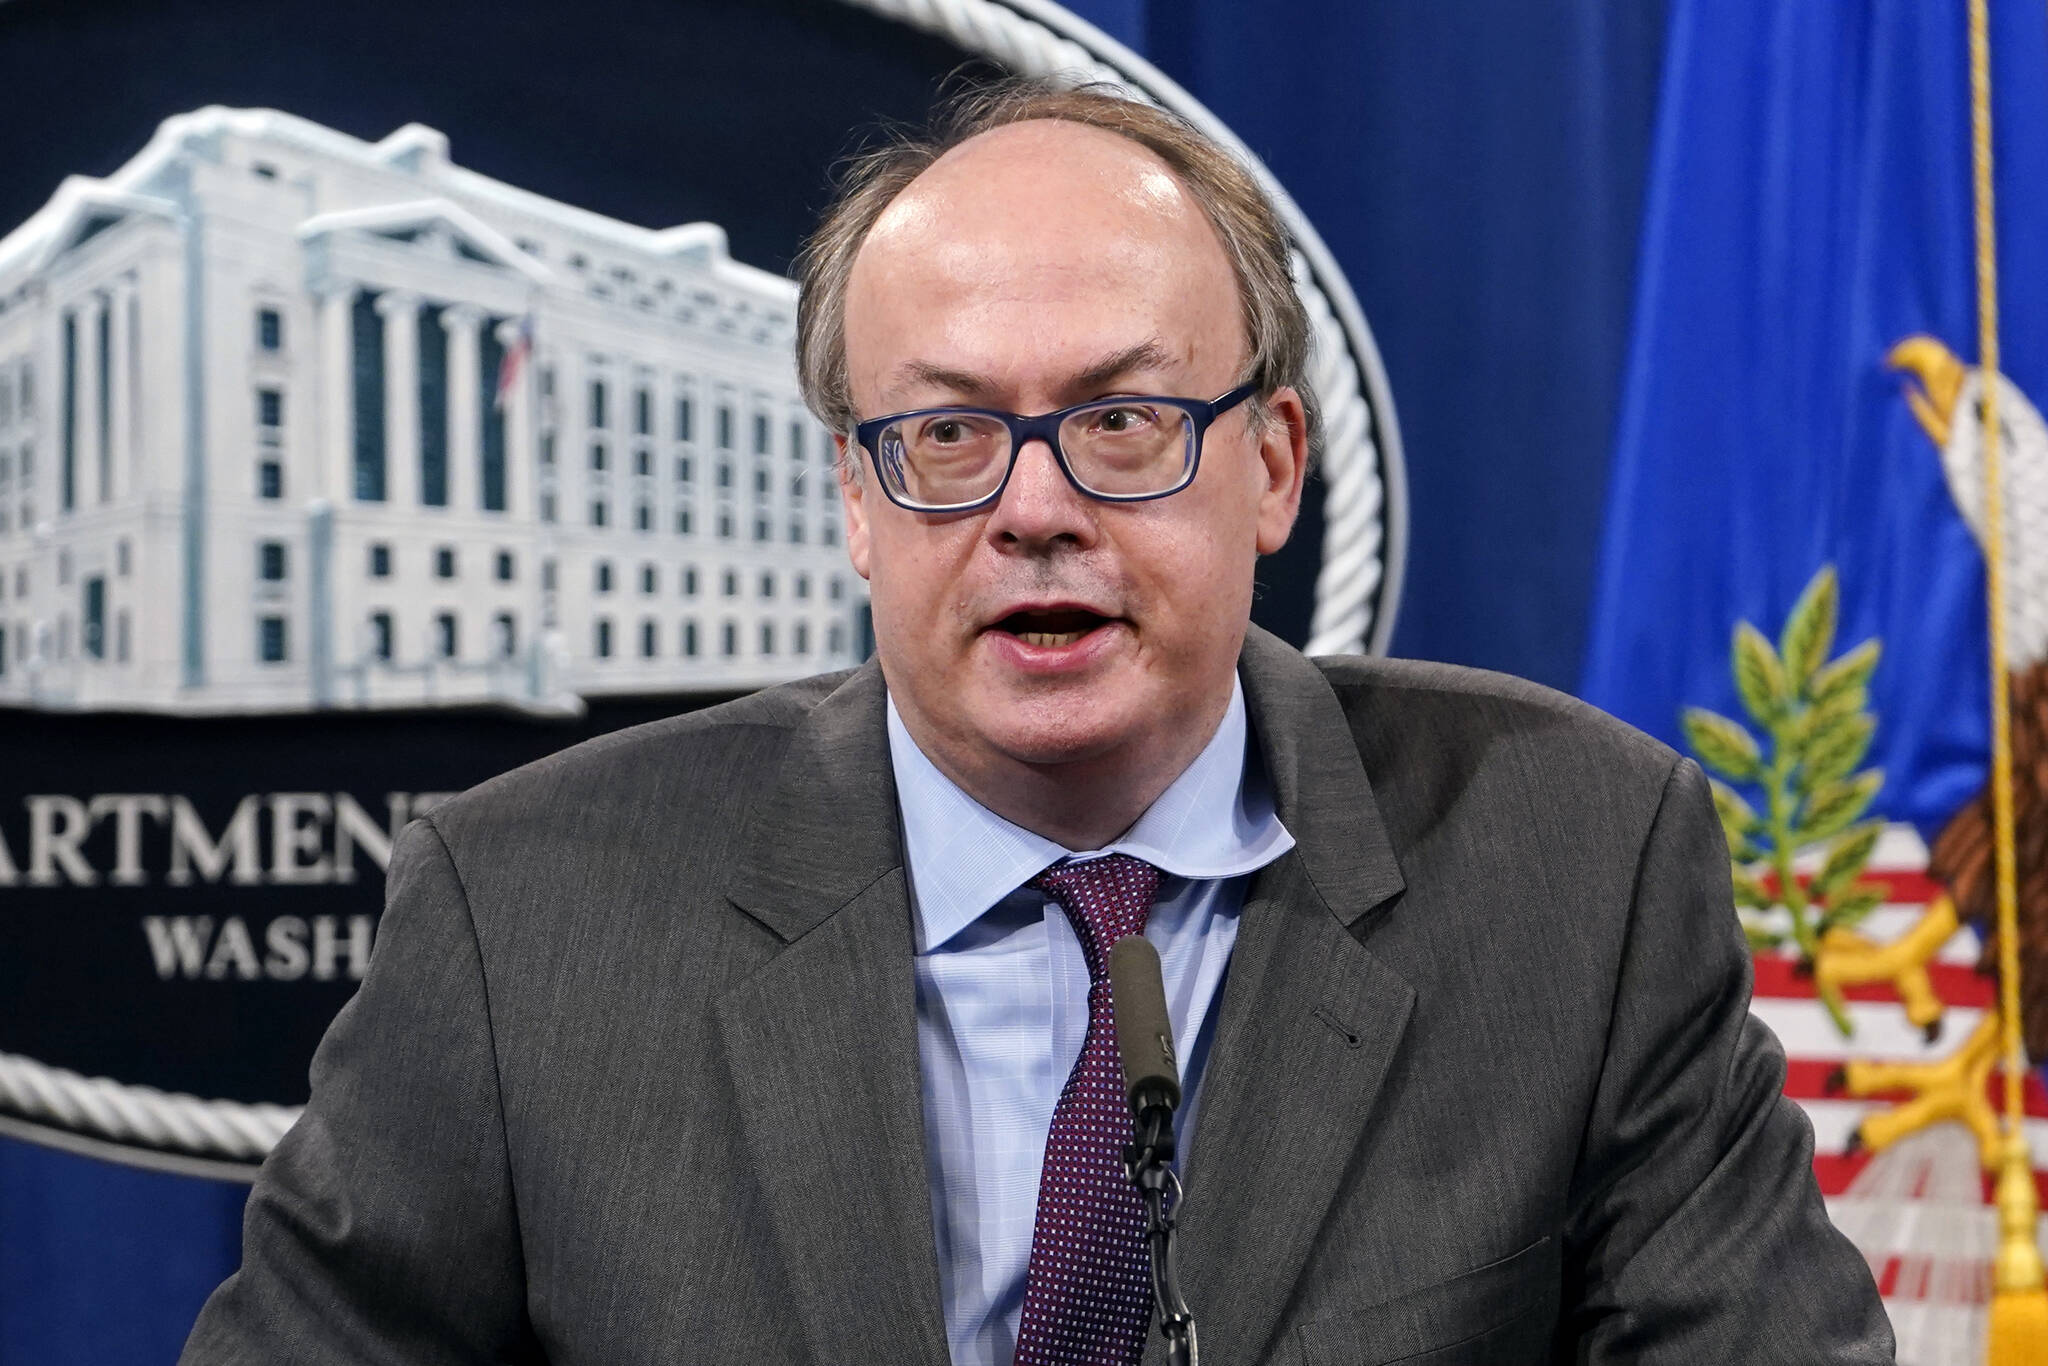 Jeffrey Clark, then-Assistant Attorney General for the Environment and Natural Resources Division, speaks during a news conference at the Justice Department in Washington, on Sept. 14, 2020. Federal agents have searched the Virginia home of the Trump-era Justice Department official who championed efforts by President Donald Trump to overturn the results of the 2020 election. (AP Photo/Susan Walsh, Pool, File)